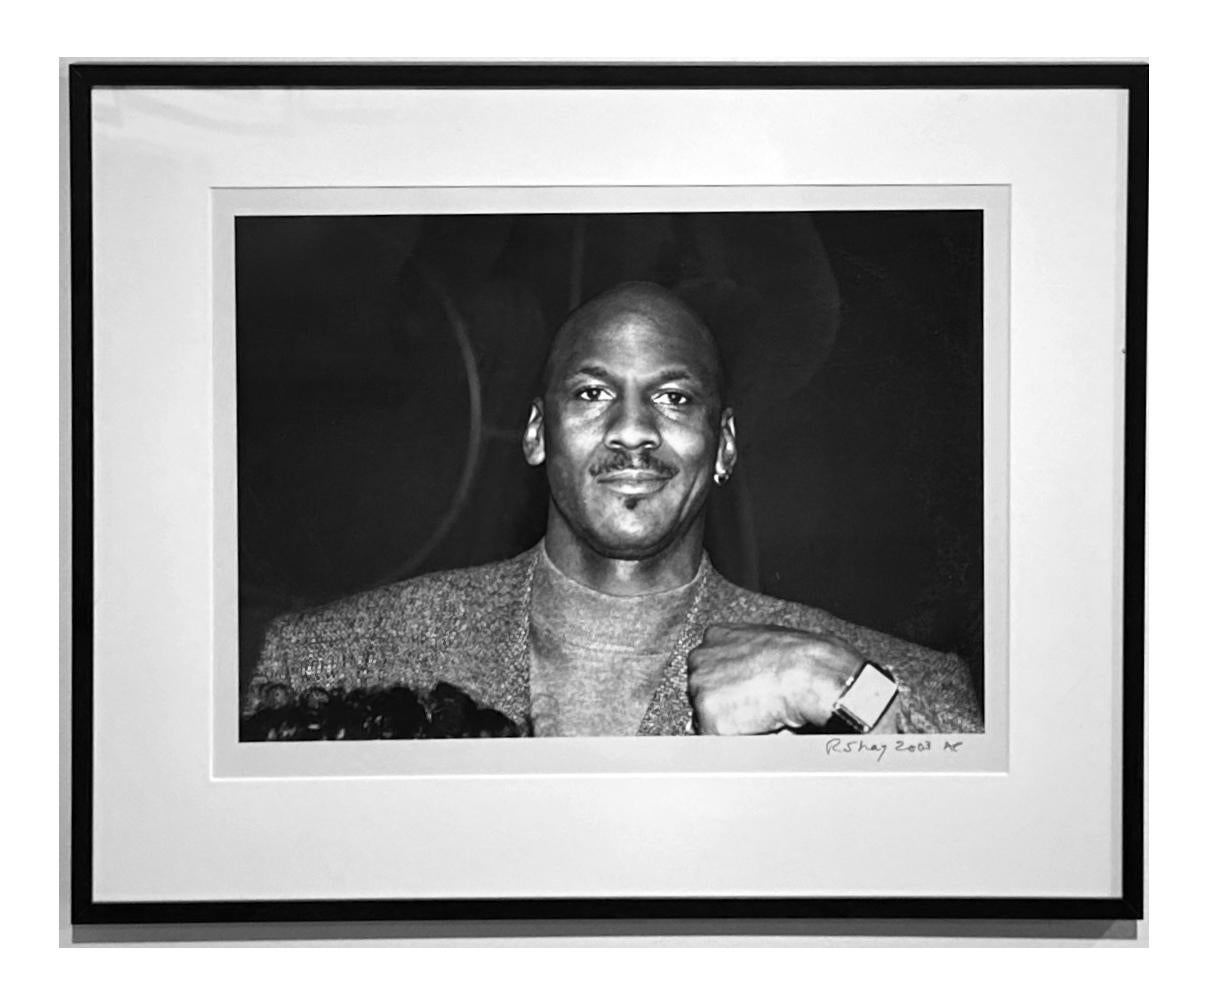 As the personal photographer for this much loved Chicago icon, Richard Shay captured MJ on his 40th birthday celebration.  This Artist Proof is matted and framed in a simple black frame measuring 16.25h x 20.25w x 1d inches.

Richard Shay
Michael